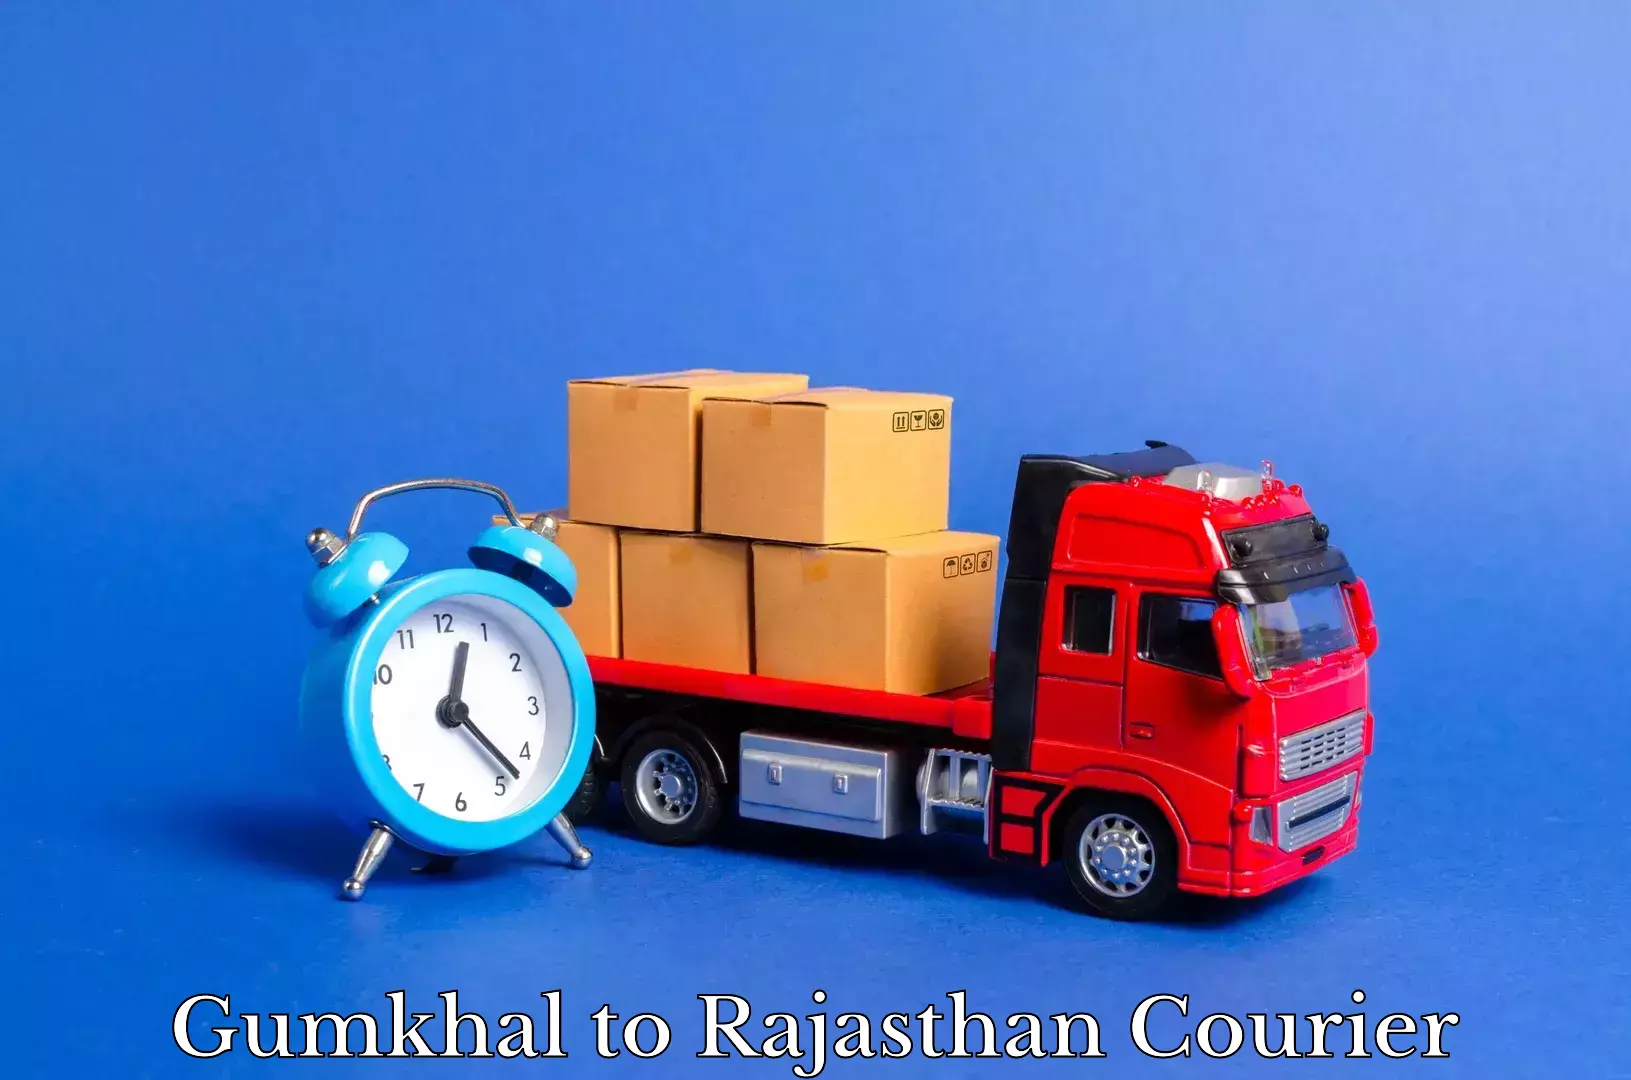 Trusted moving company Gumkhal to Rajasthan